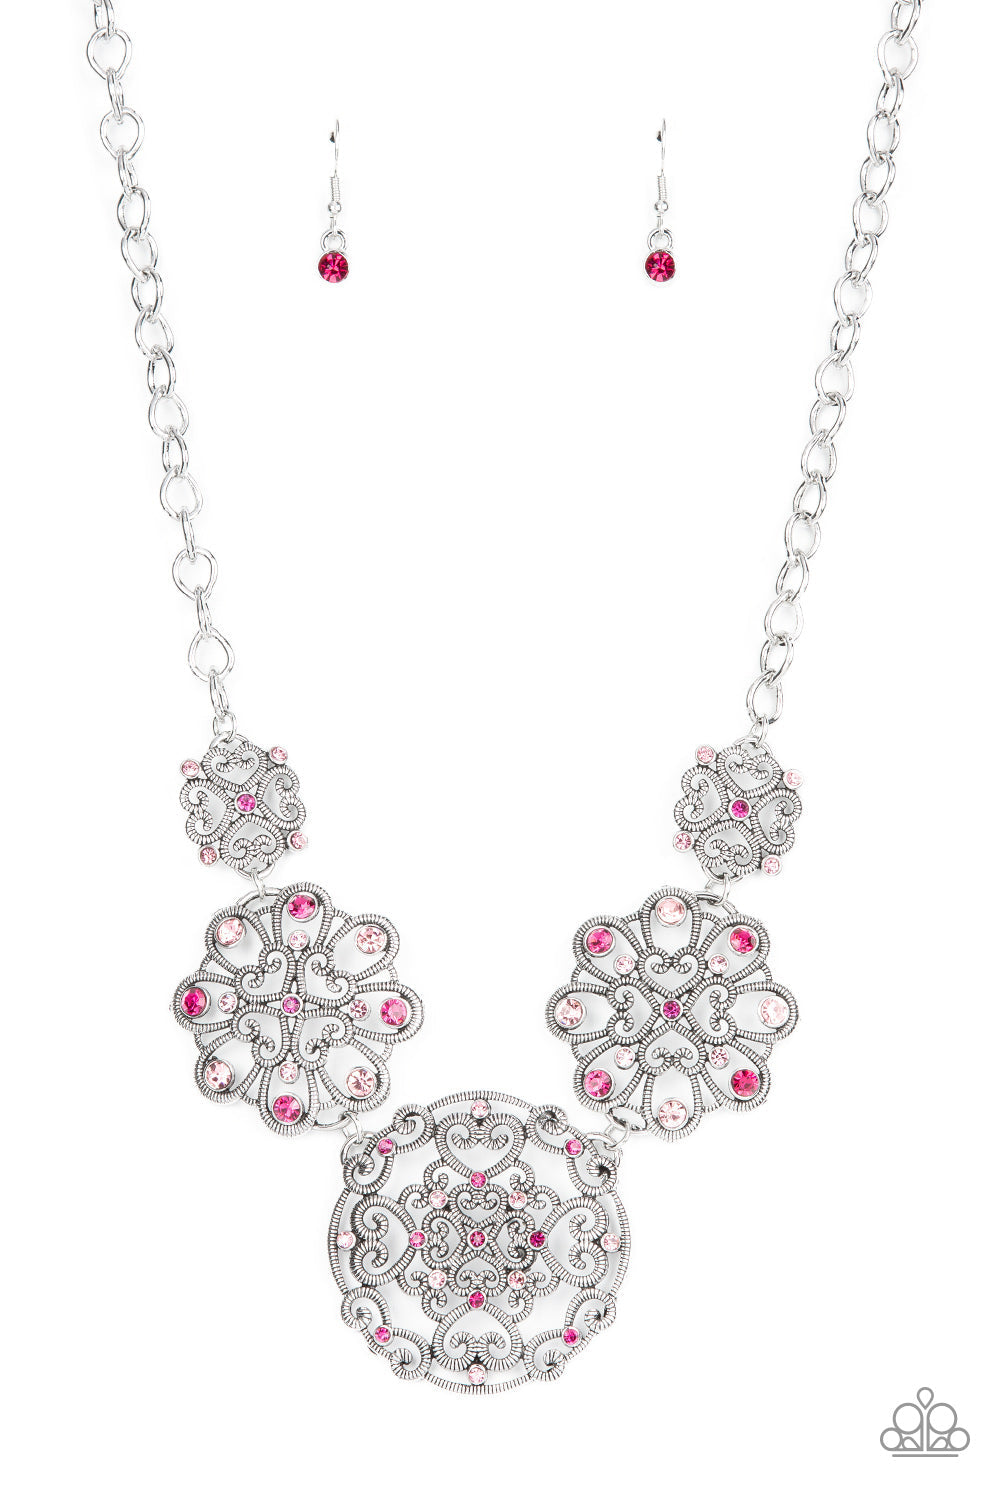 Royally Romantic - Pink and Silver Necklace - Paparazzi Accessories - Spiraling with heart shaped filigree patterns, a mismatched collection of silver mandala-like frames delicately link below the collar. A smattering of dark and light pink rhinestones adorn the ornate frames, adding a spritz of glitter to the regal display. Features an adjustable clasp closure. Sold as one individual necklace.